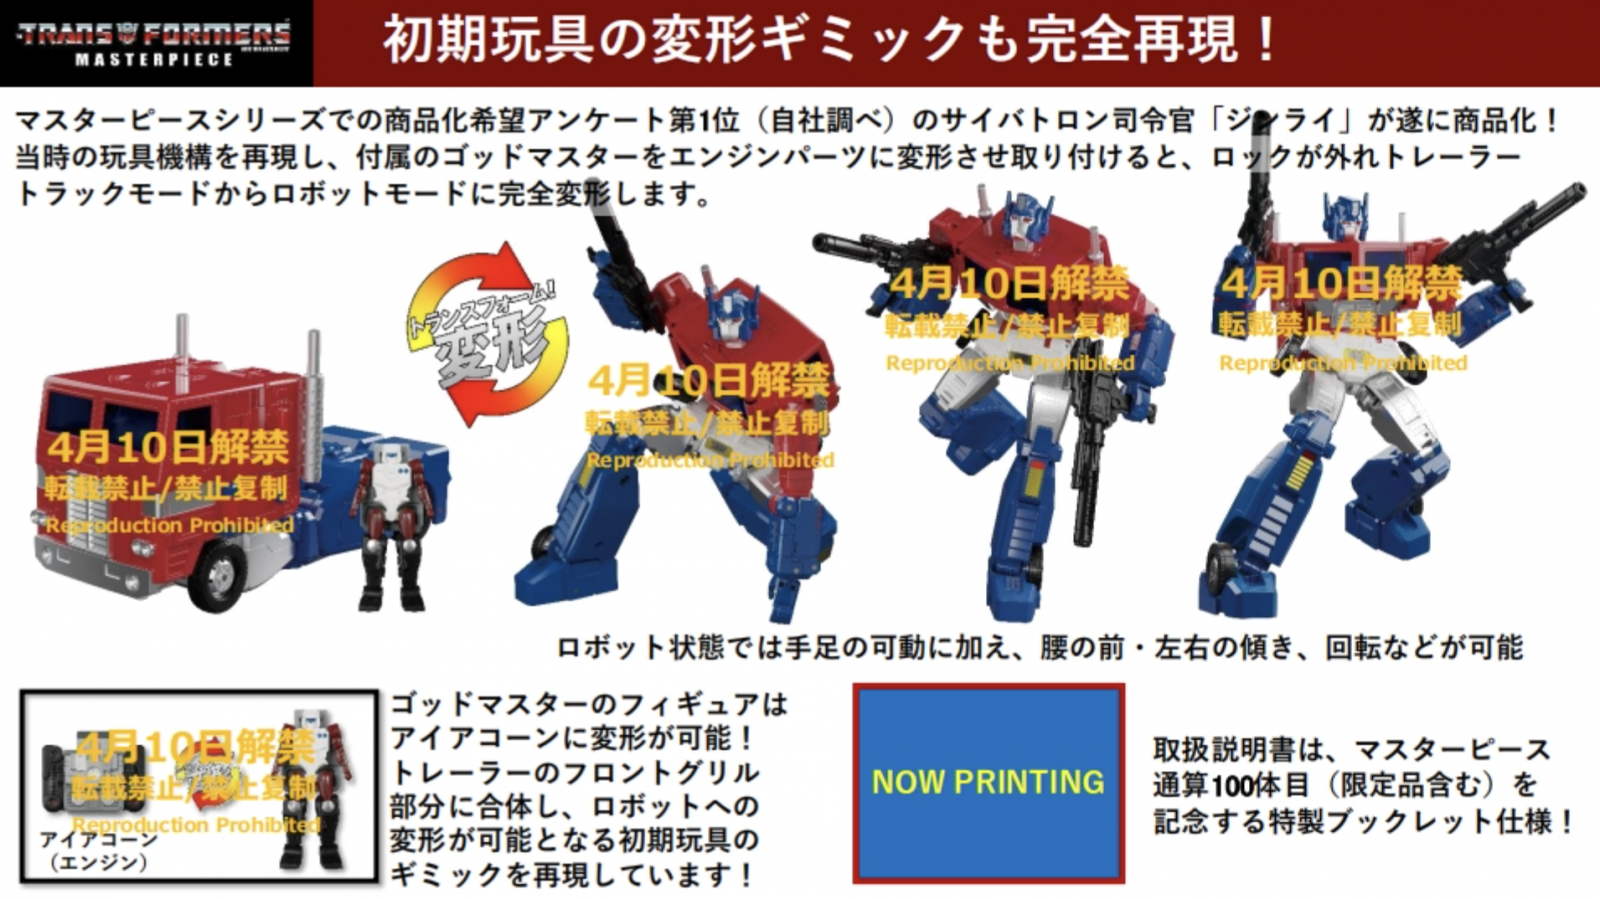 Transformers News: New Images Surface of MP-60 Ginrai and MPG-09 Super Ginrai